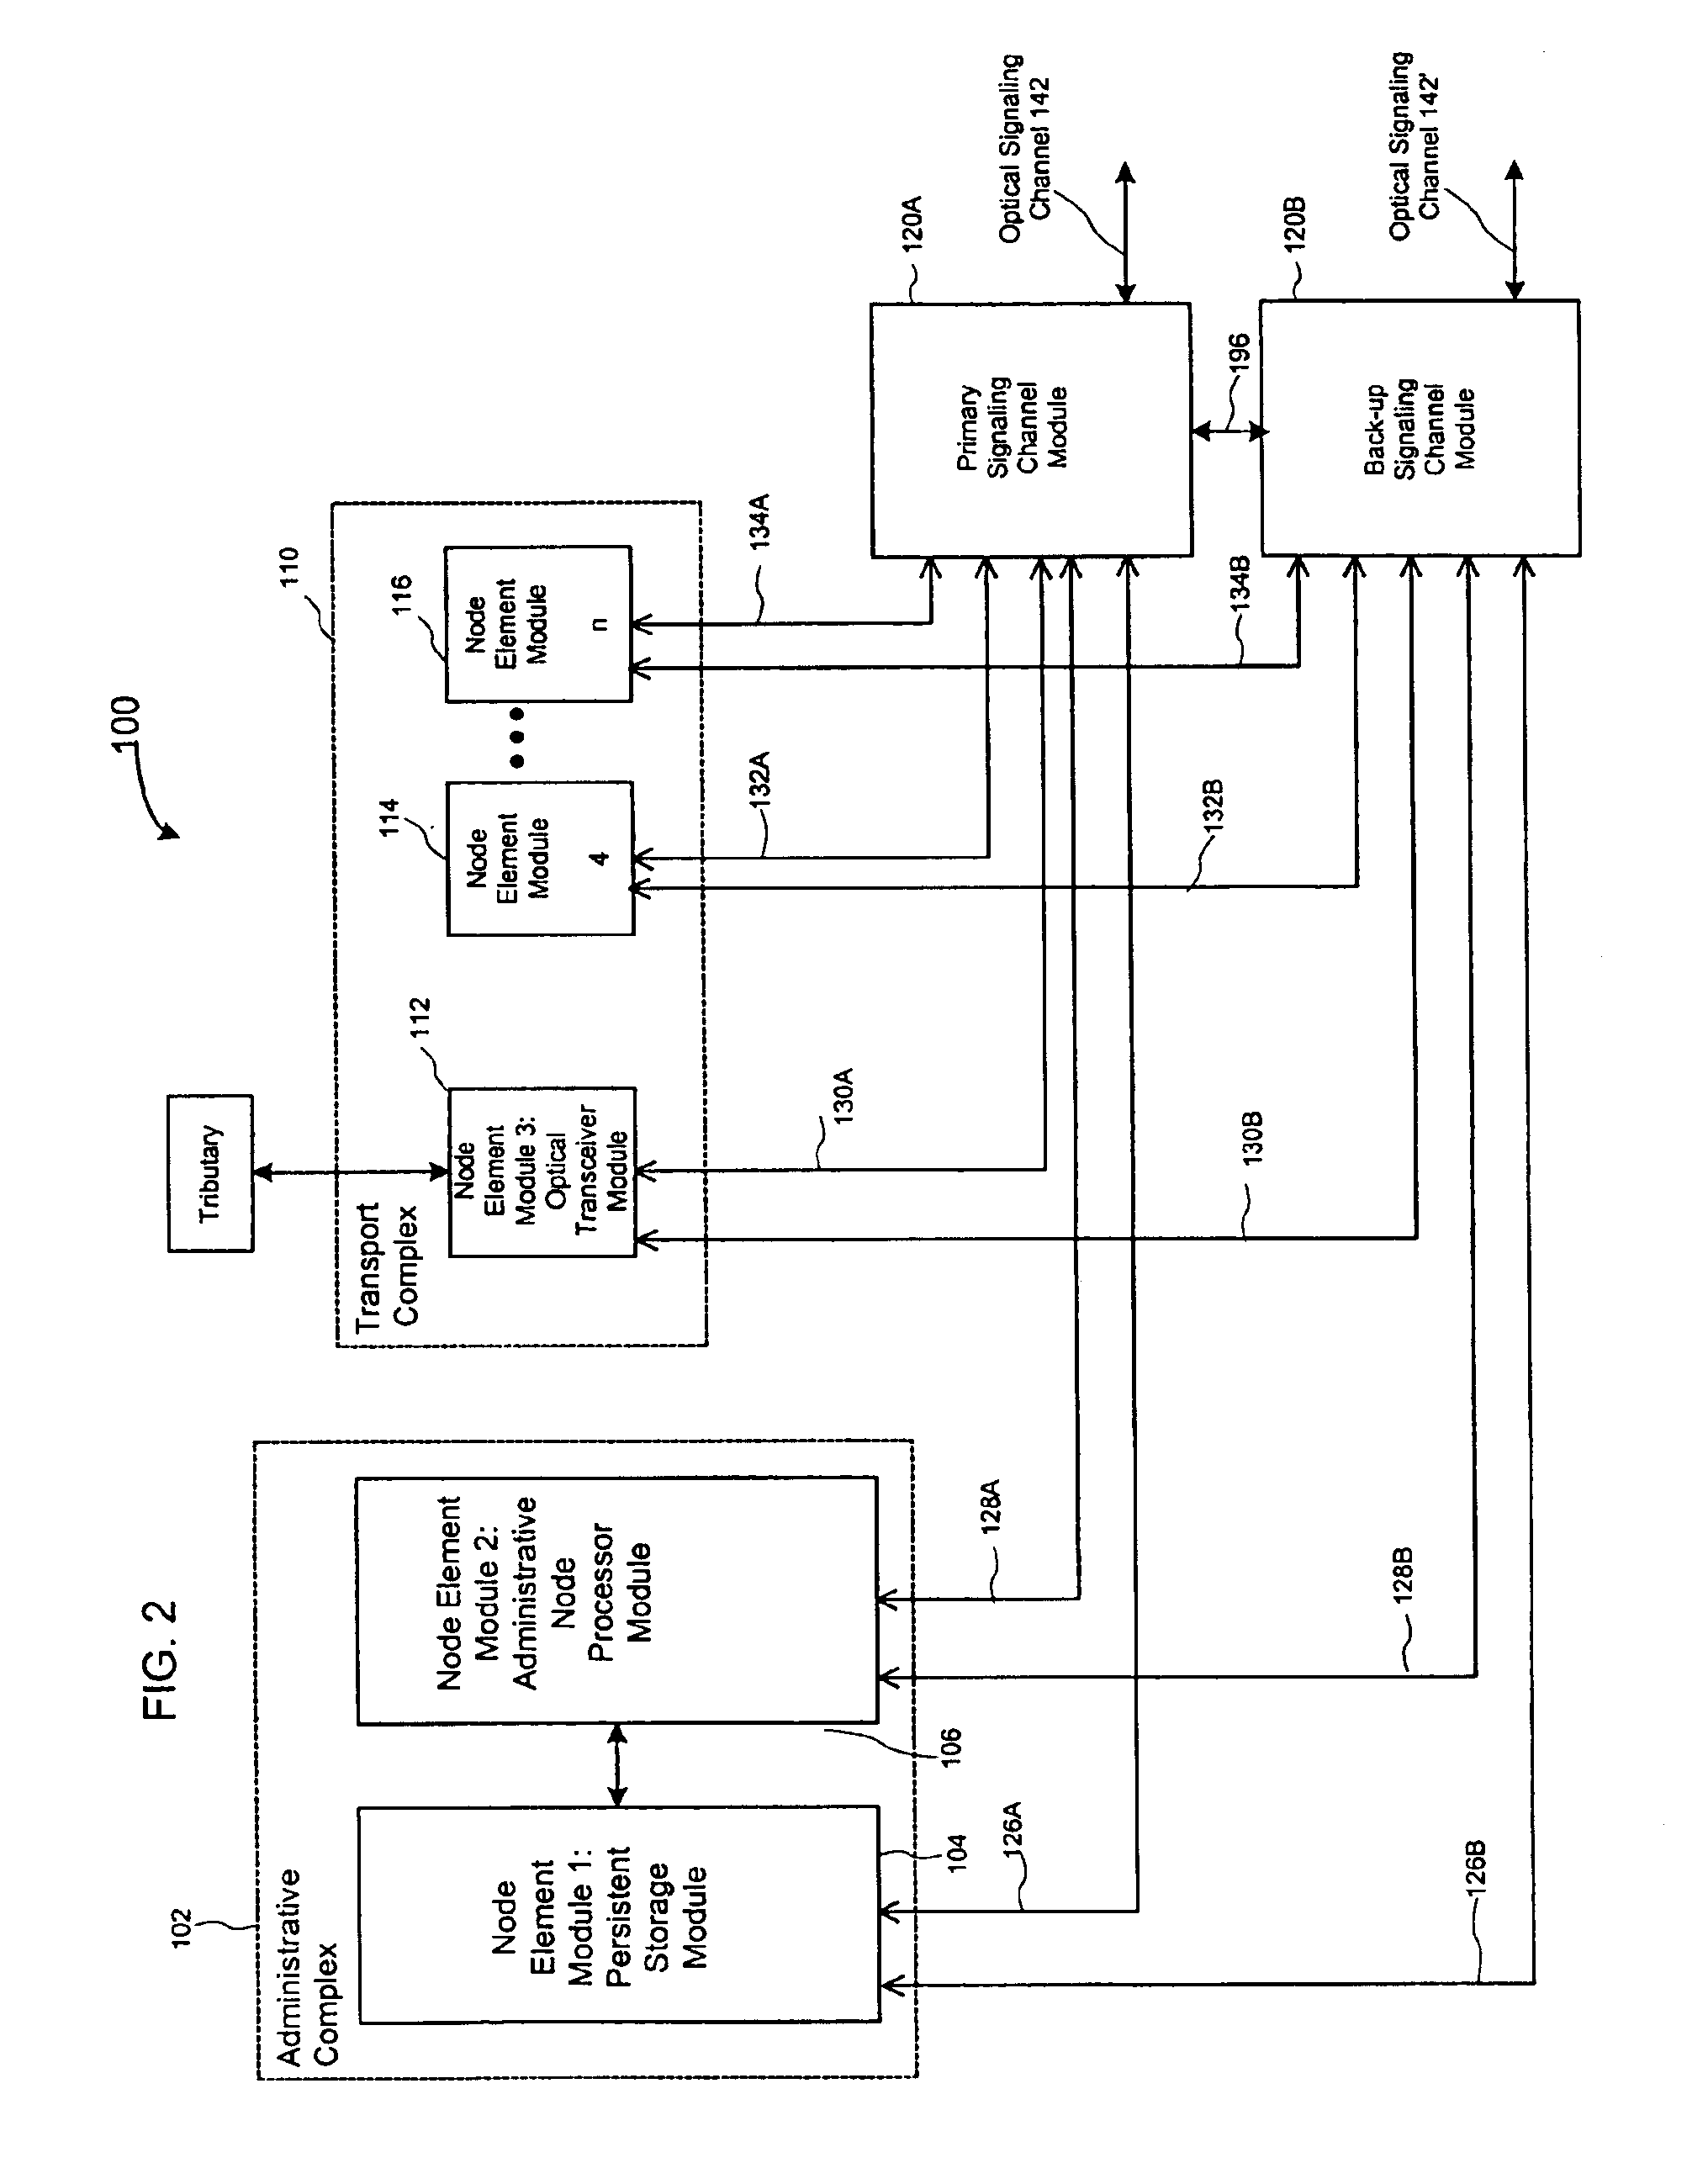 System and method of memory management for providing data storage across a reboot